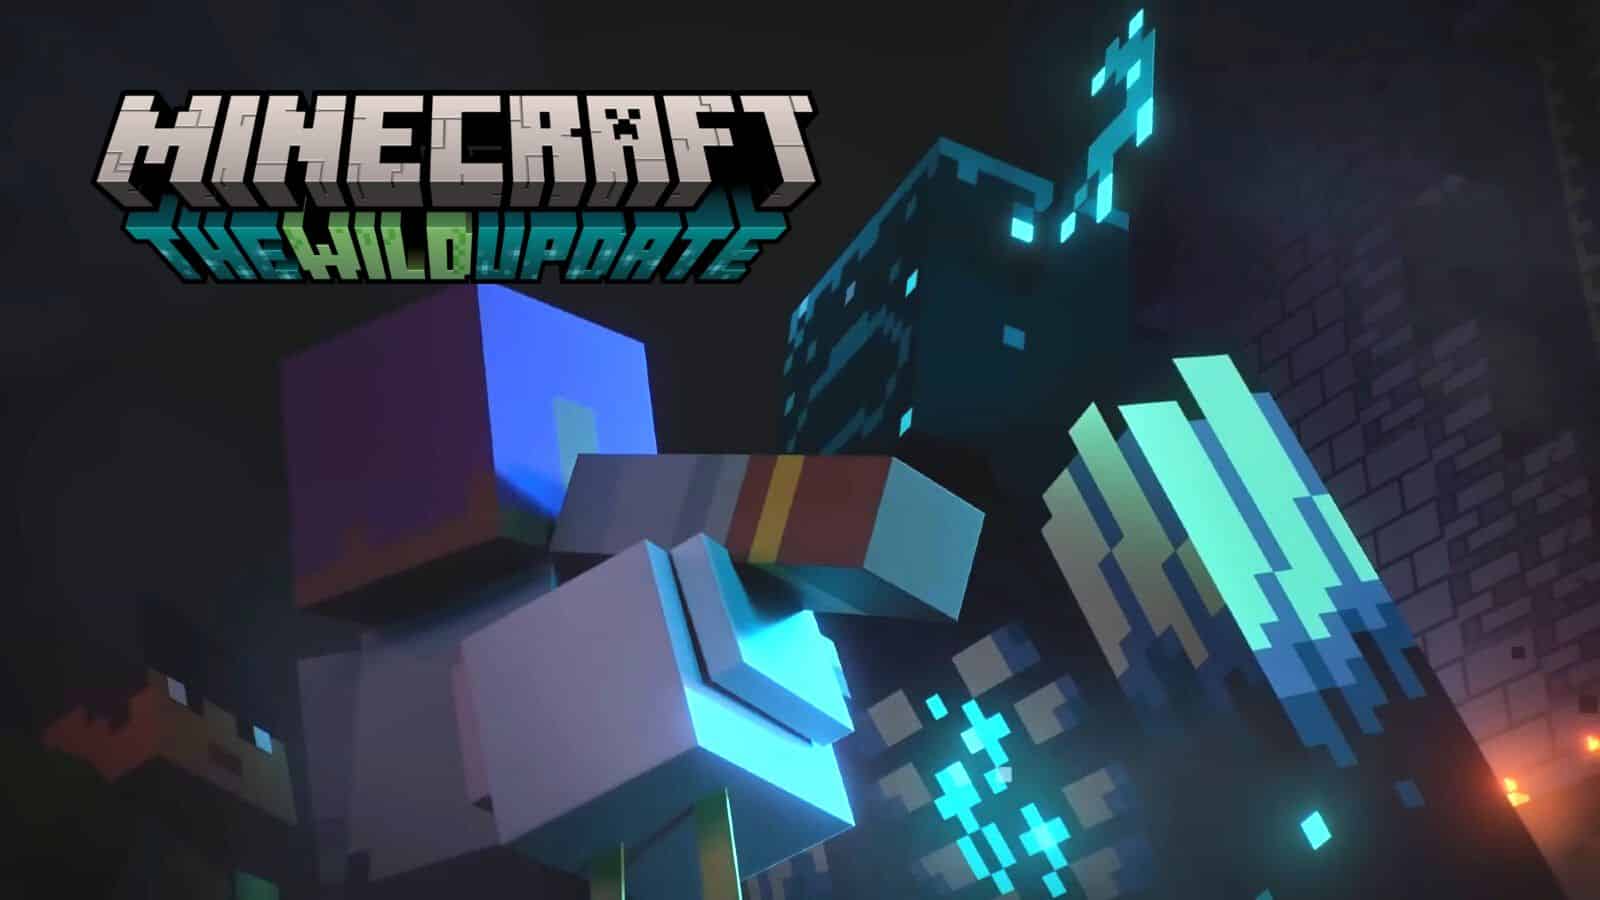 Minecraft devs reveal there are “mysteries” to discover in 1.19